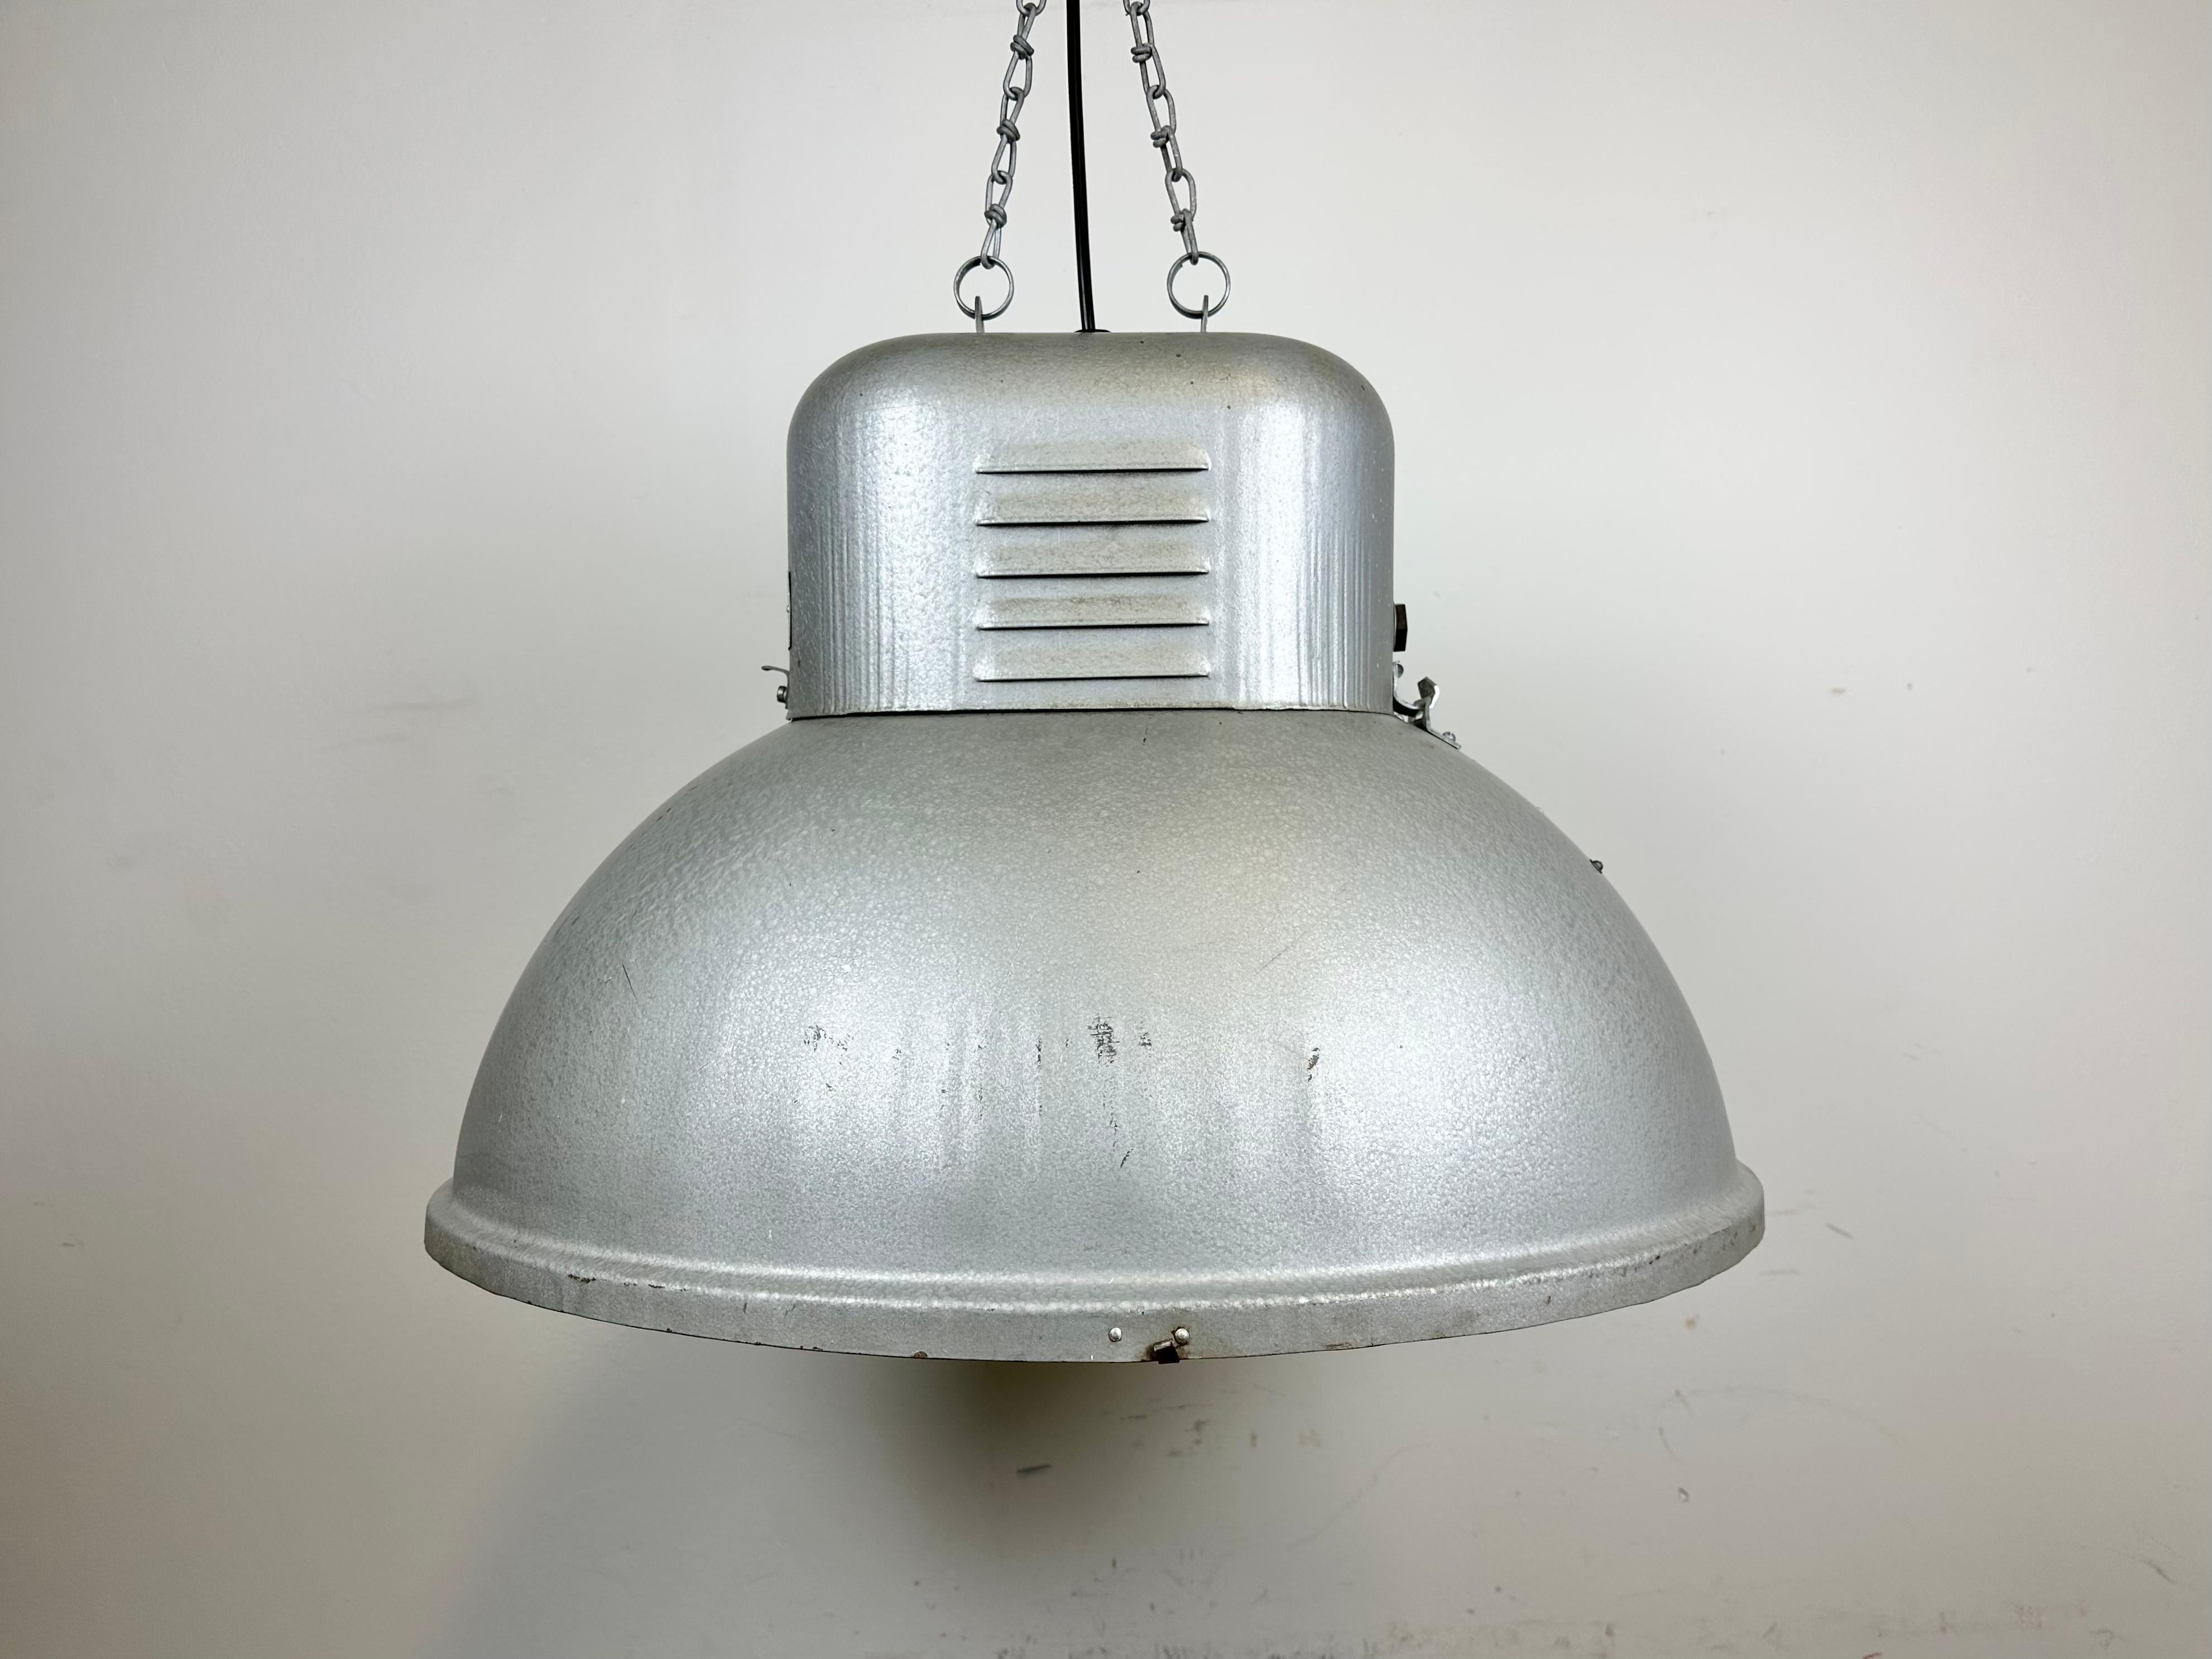 Vintage industrial hanging lamp manufactured in 1960s by Predom Mesko in Skarzysko-Kamienna in Poland. It features a hammerpaint iron body. The original porcelain socket E 40 is equipped with an adapter from E40 to E27 and requires E 27/ E 26 light